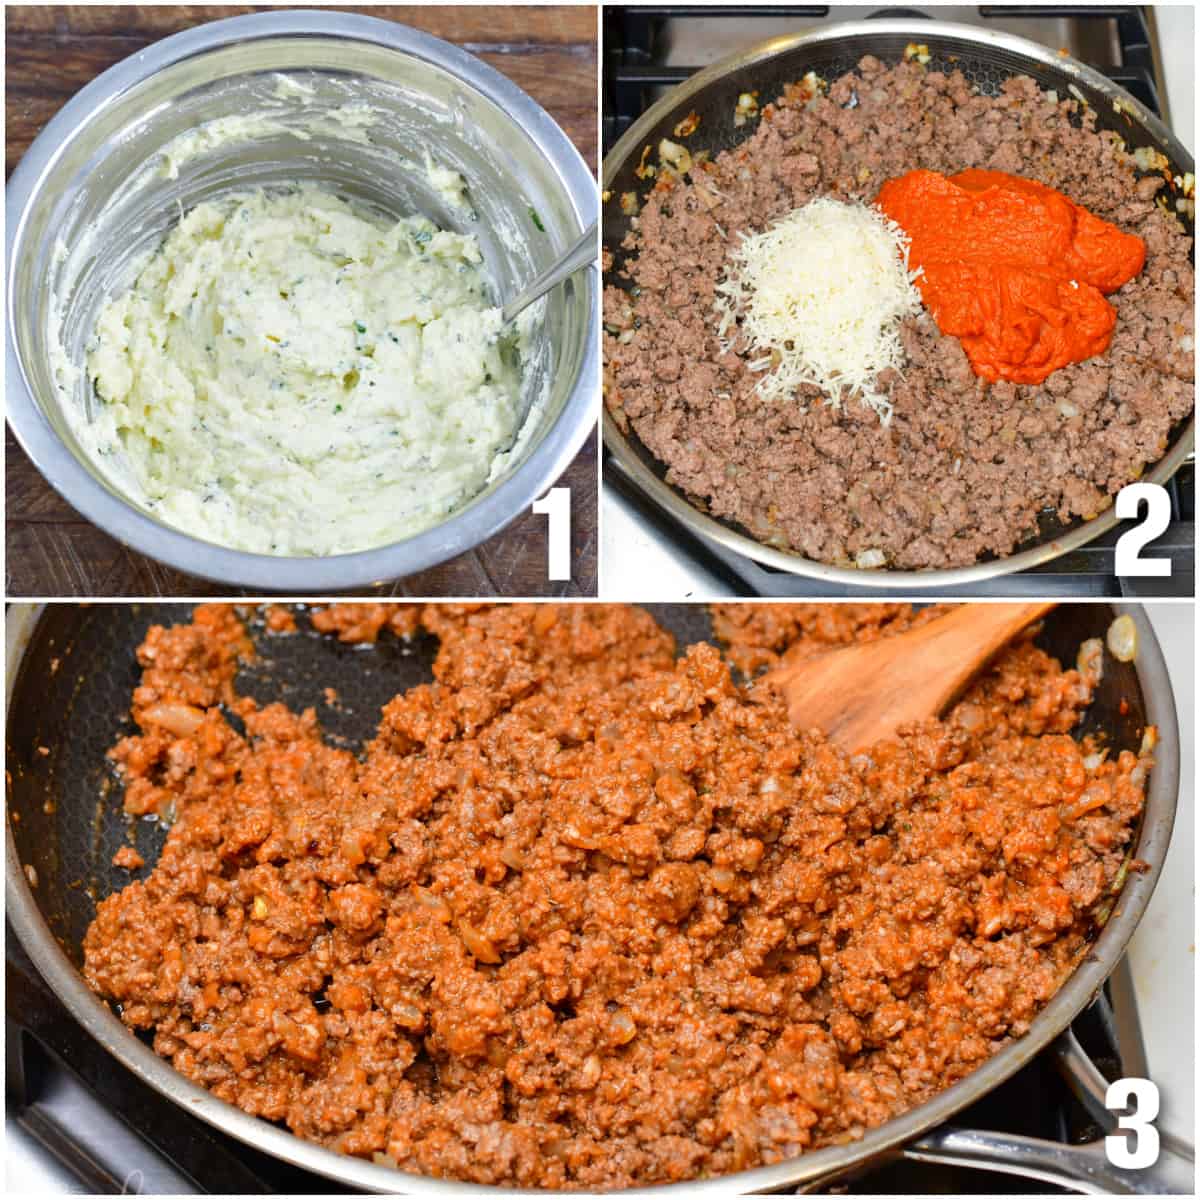 Collage of 3 images of mixing the cheeses, meet and sauce in a pan, stiring it up.